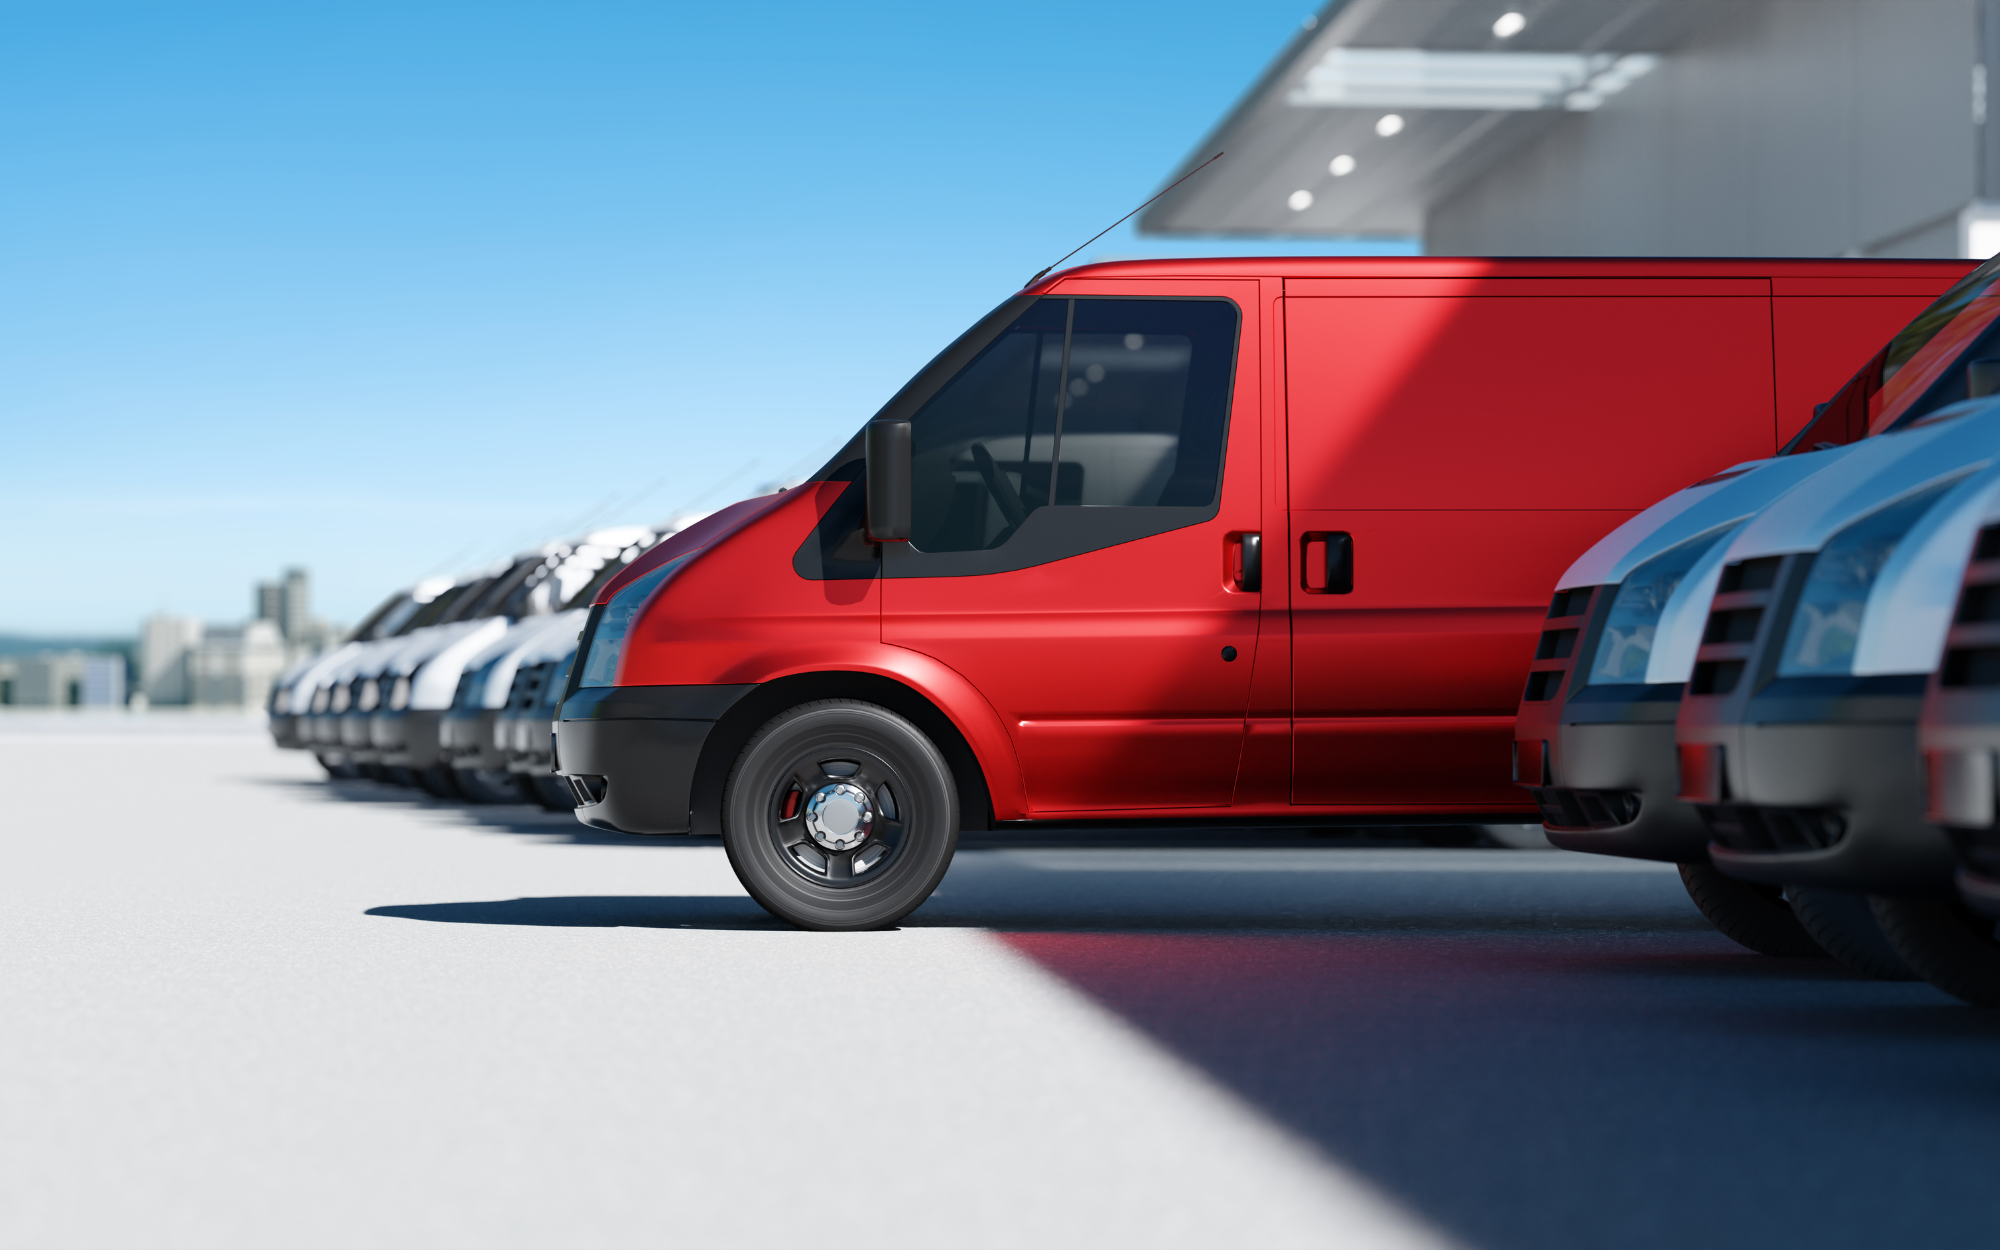 Red van and white vans in a row